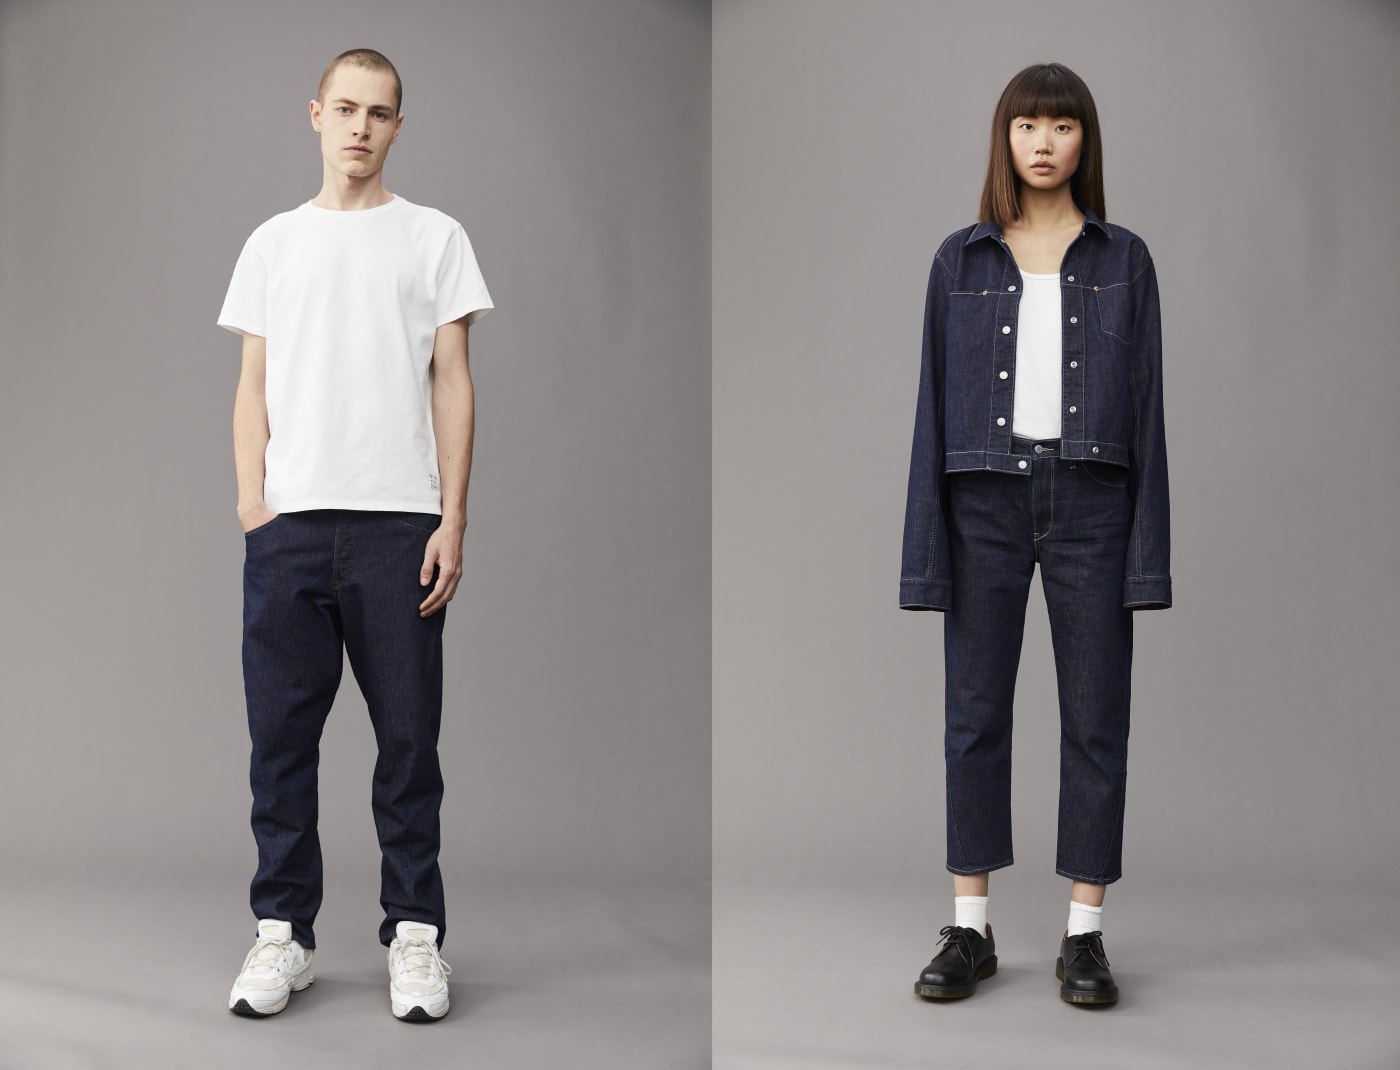 Indien Ubevæbnet Ideel Levis Brings Back the 90s with Their Engineered Jeans | Complex UK